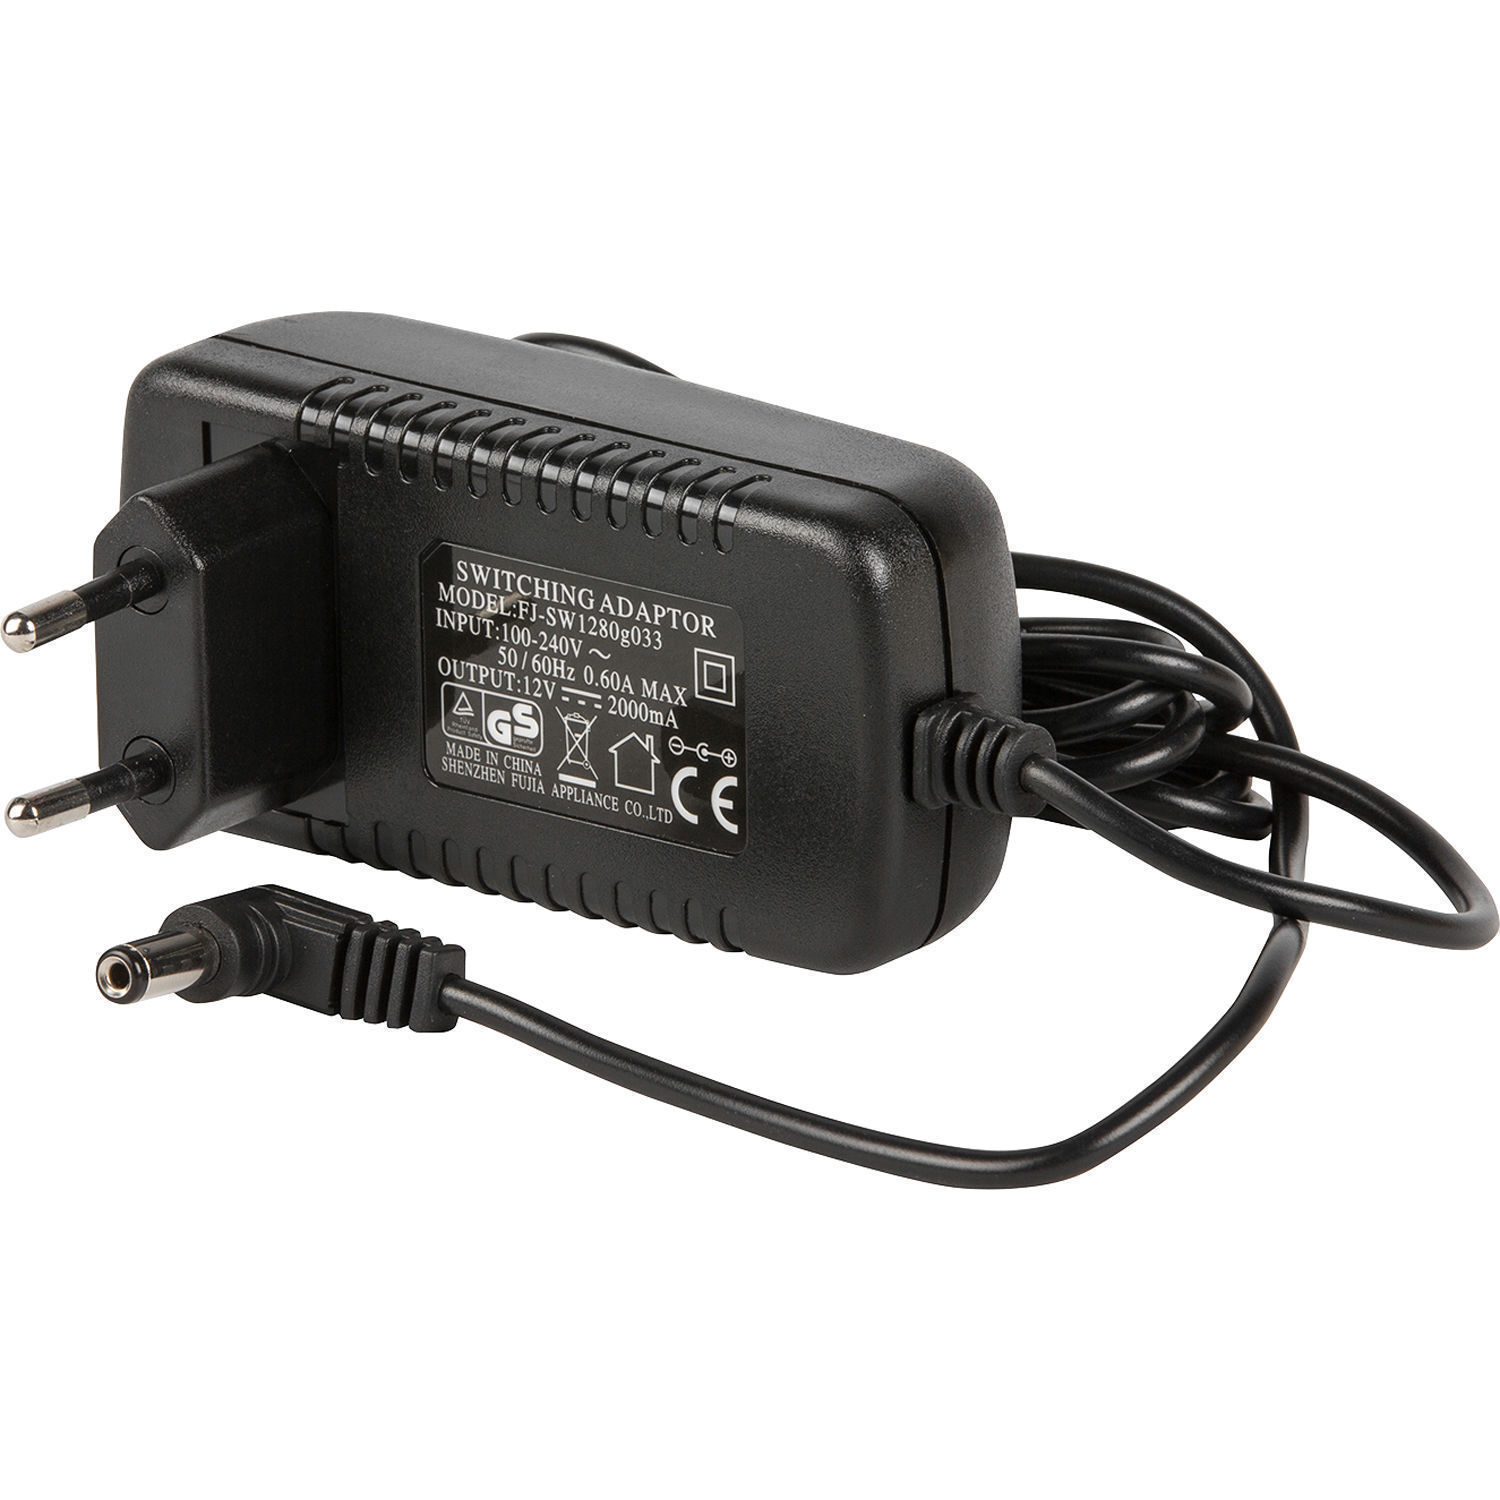 https://pibox.in/wp-content/uploads/2022/07/ikan_ac_12v_2a_typec_12v_2a_ac_adapter_europe_1266062.jpg